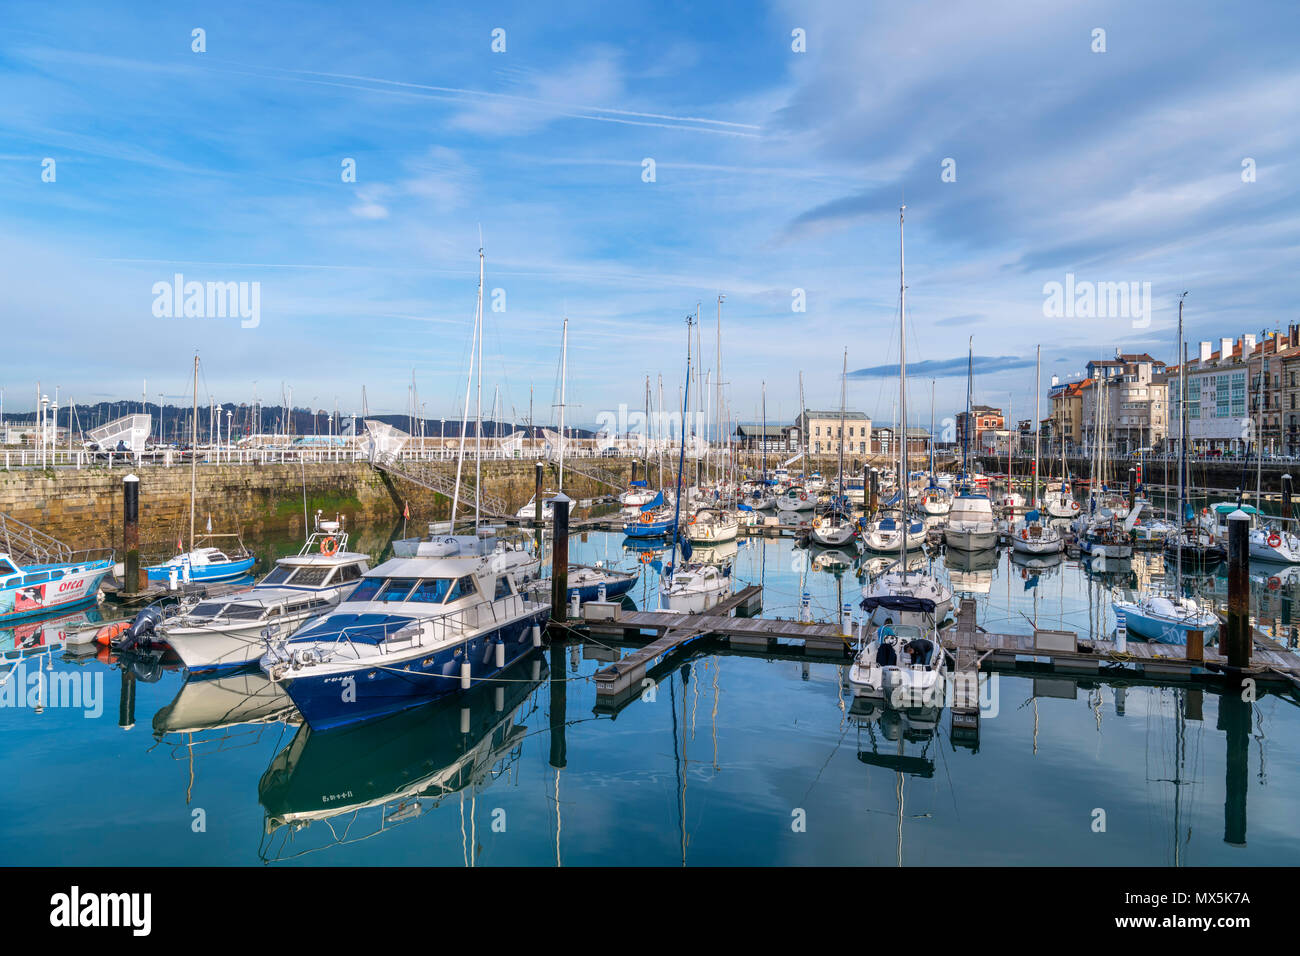 Harbour in Gijón, Asturias, Bay of Biscay, Spain Stock Photo